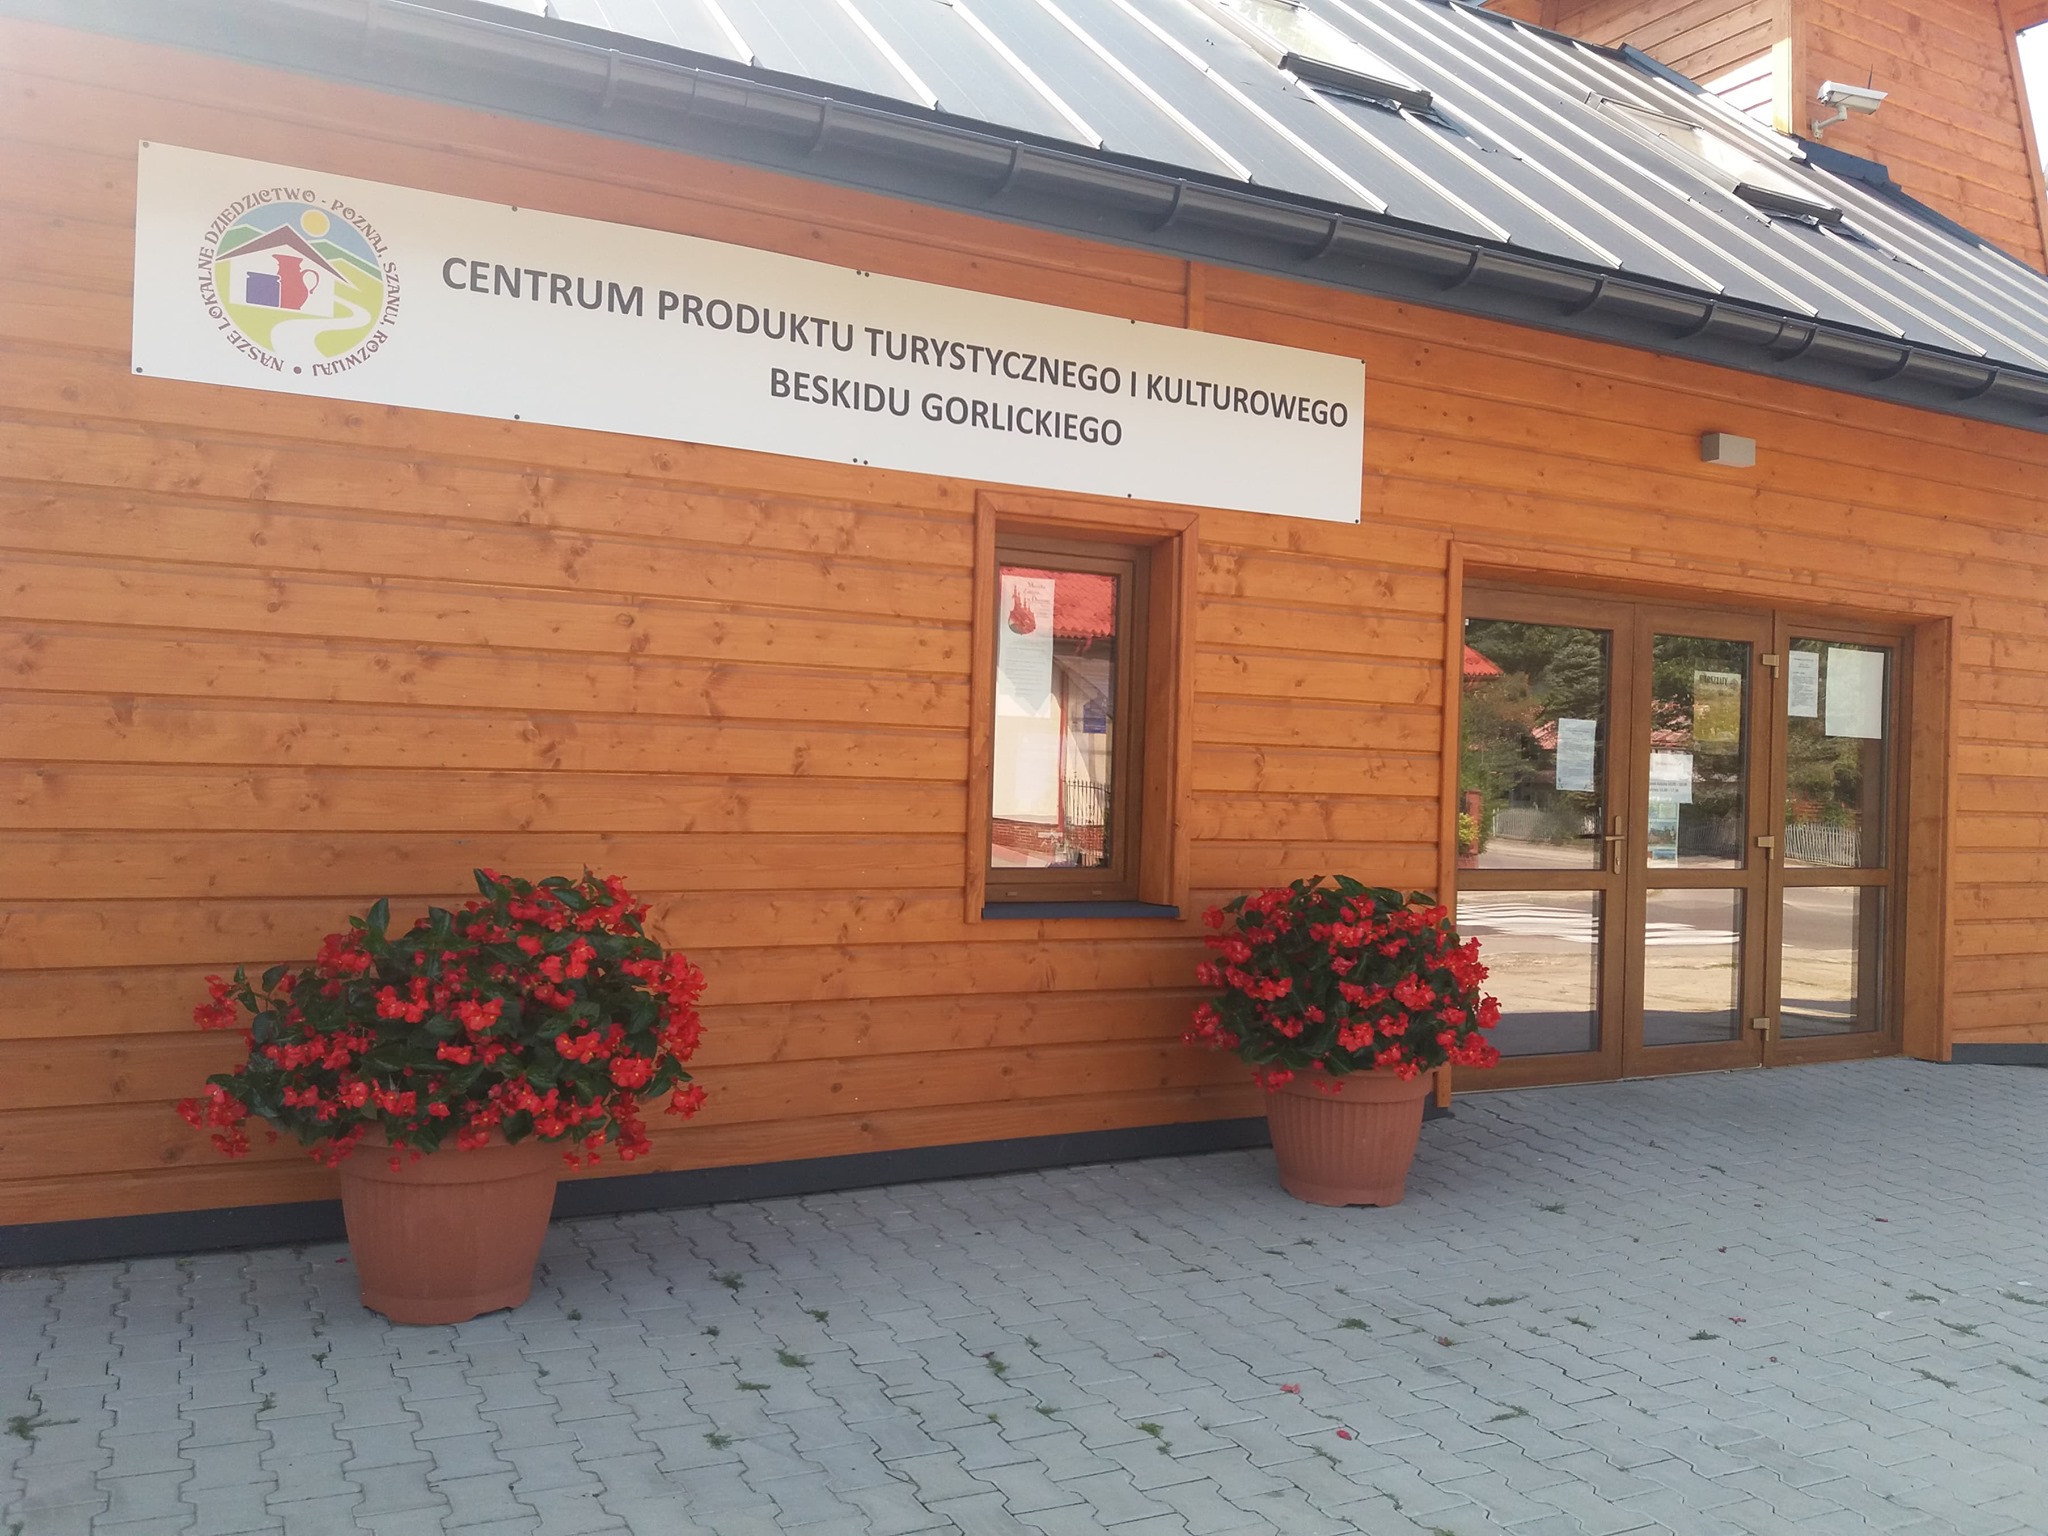 Tourist and Cultural Product Center of Beskid Gorlicki